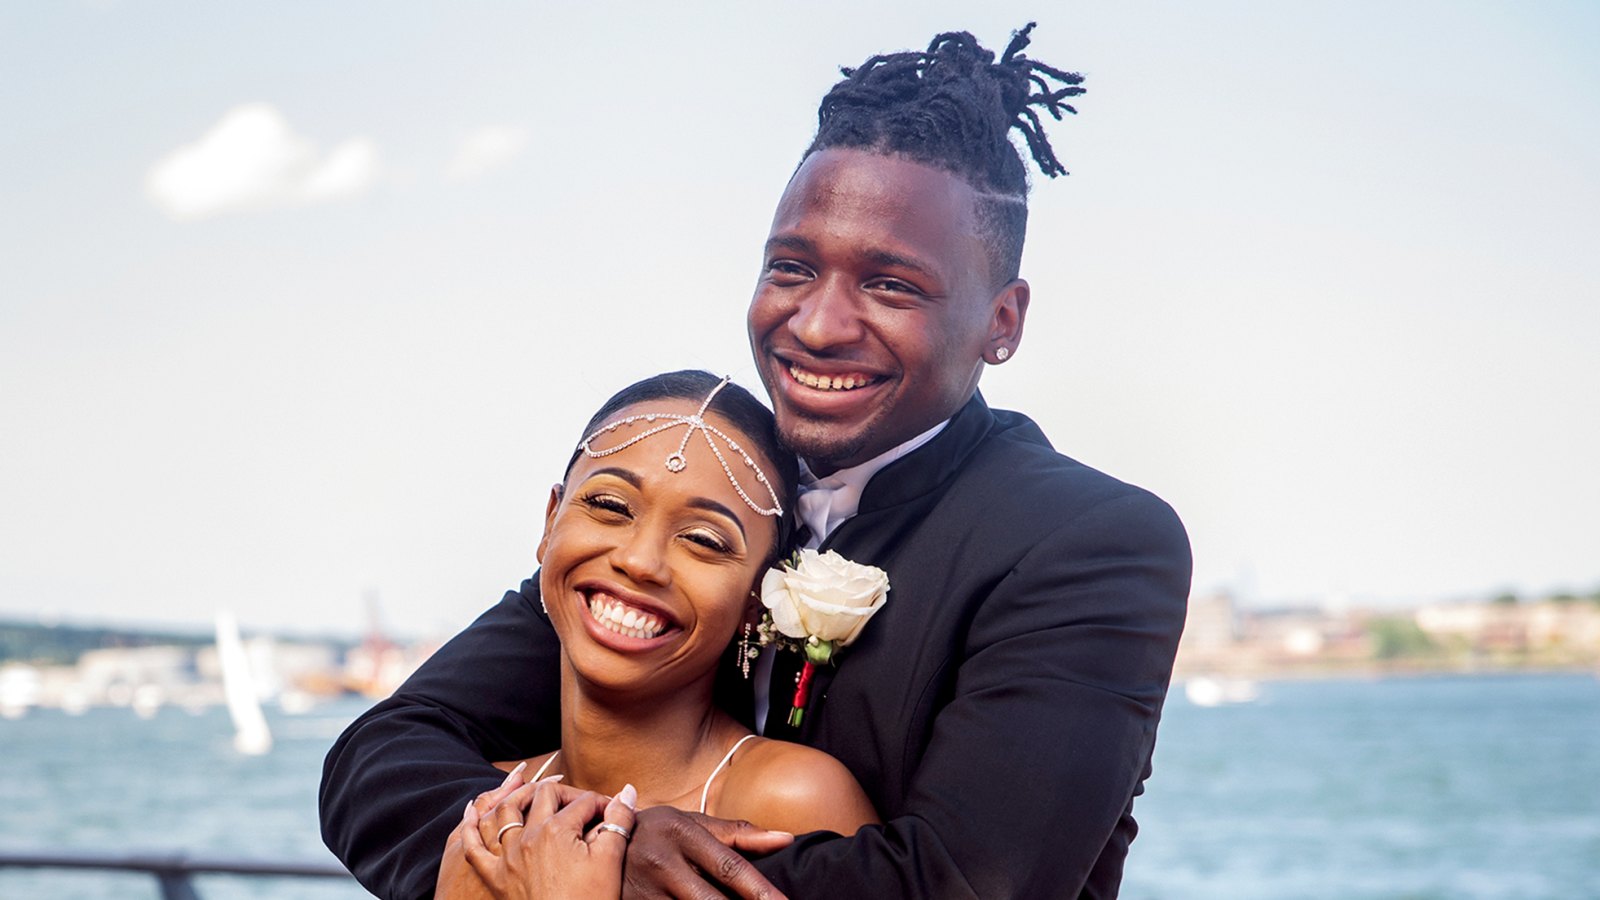 Shawniece Jackson and Jephte Pierre star in season 6 of ‘Married at First Sight‘